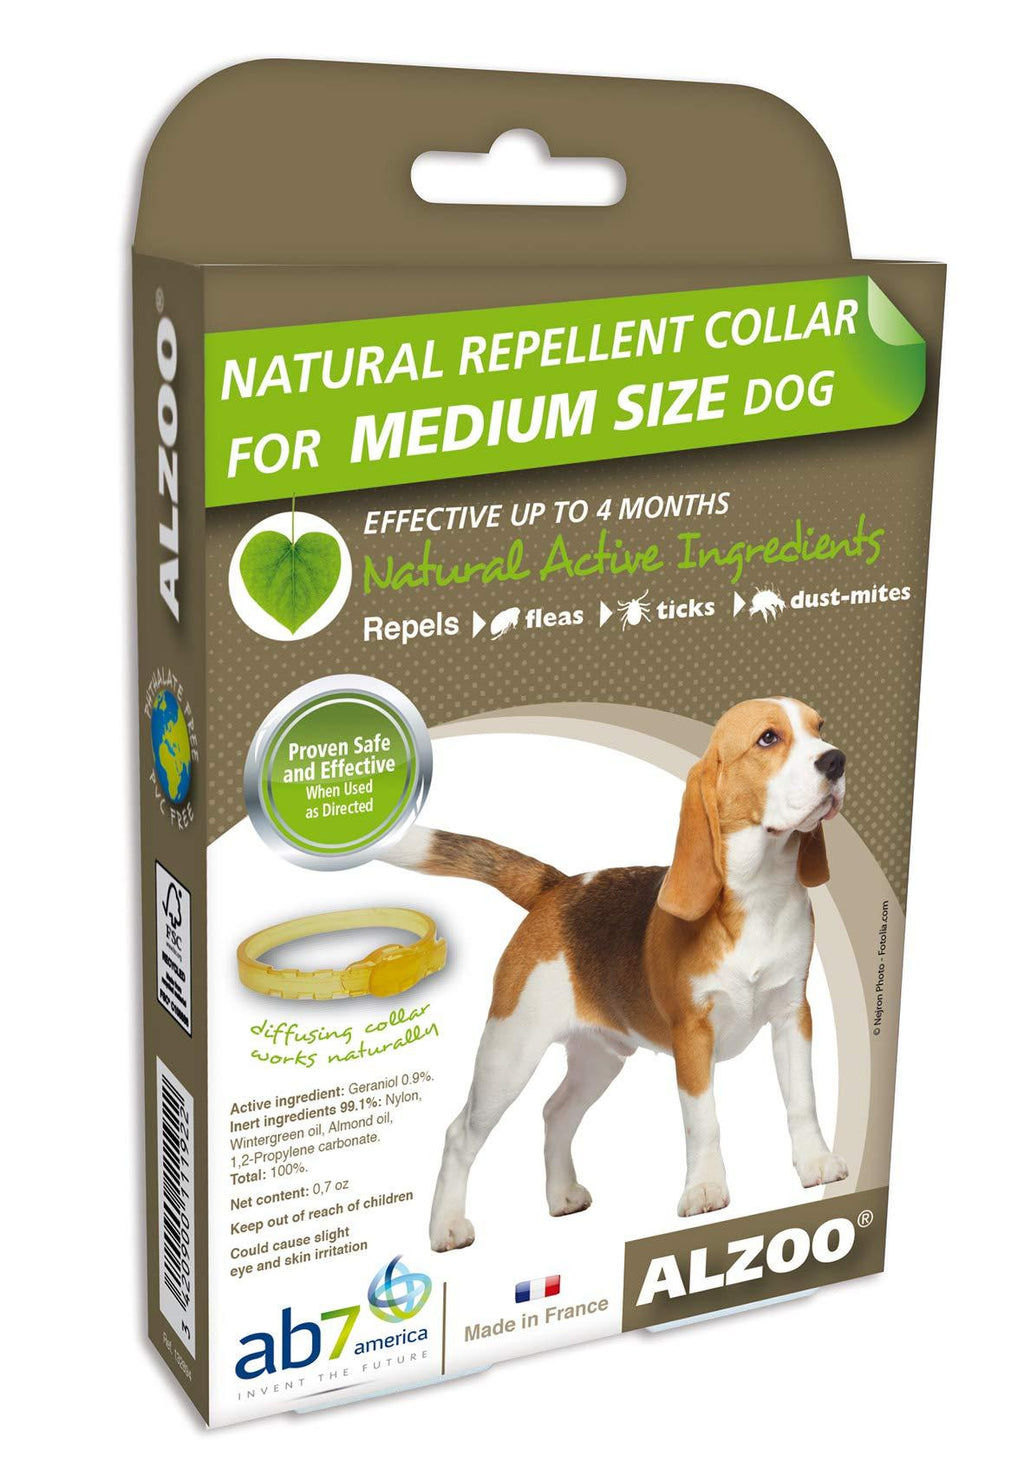 [Australia] - ALZOO Natural Repellent Diffusing Dog Collar | Repels Fleas, Ticks, Dust-Mites Using Natural Active Ingredients | for Medium Sized Dogs 